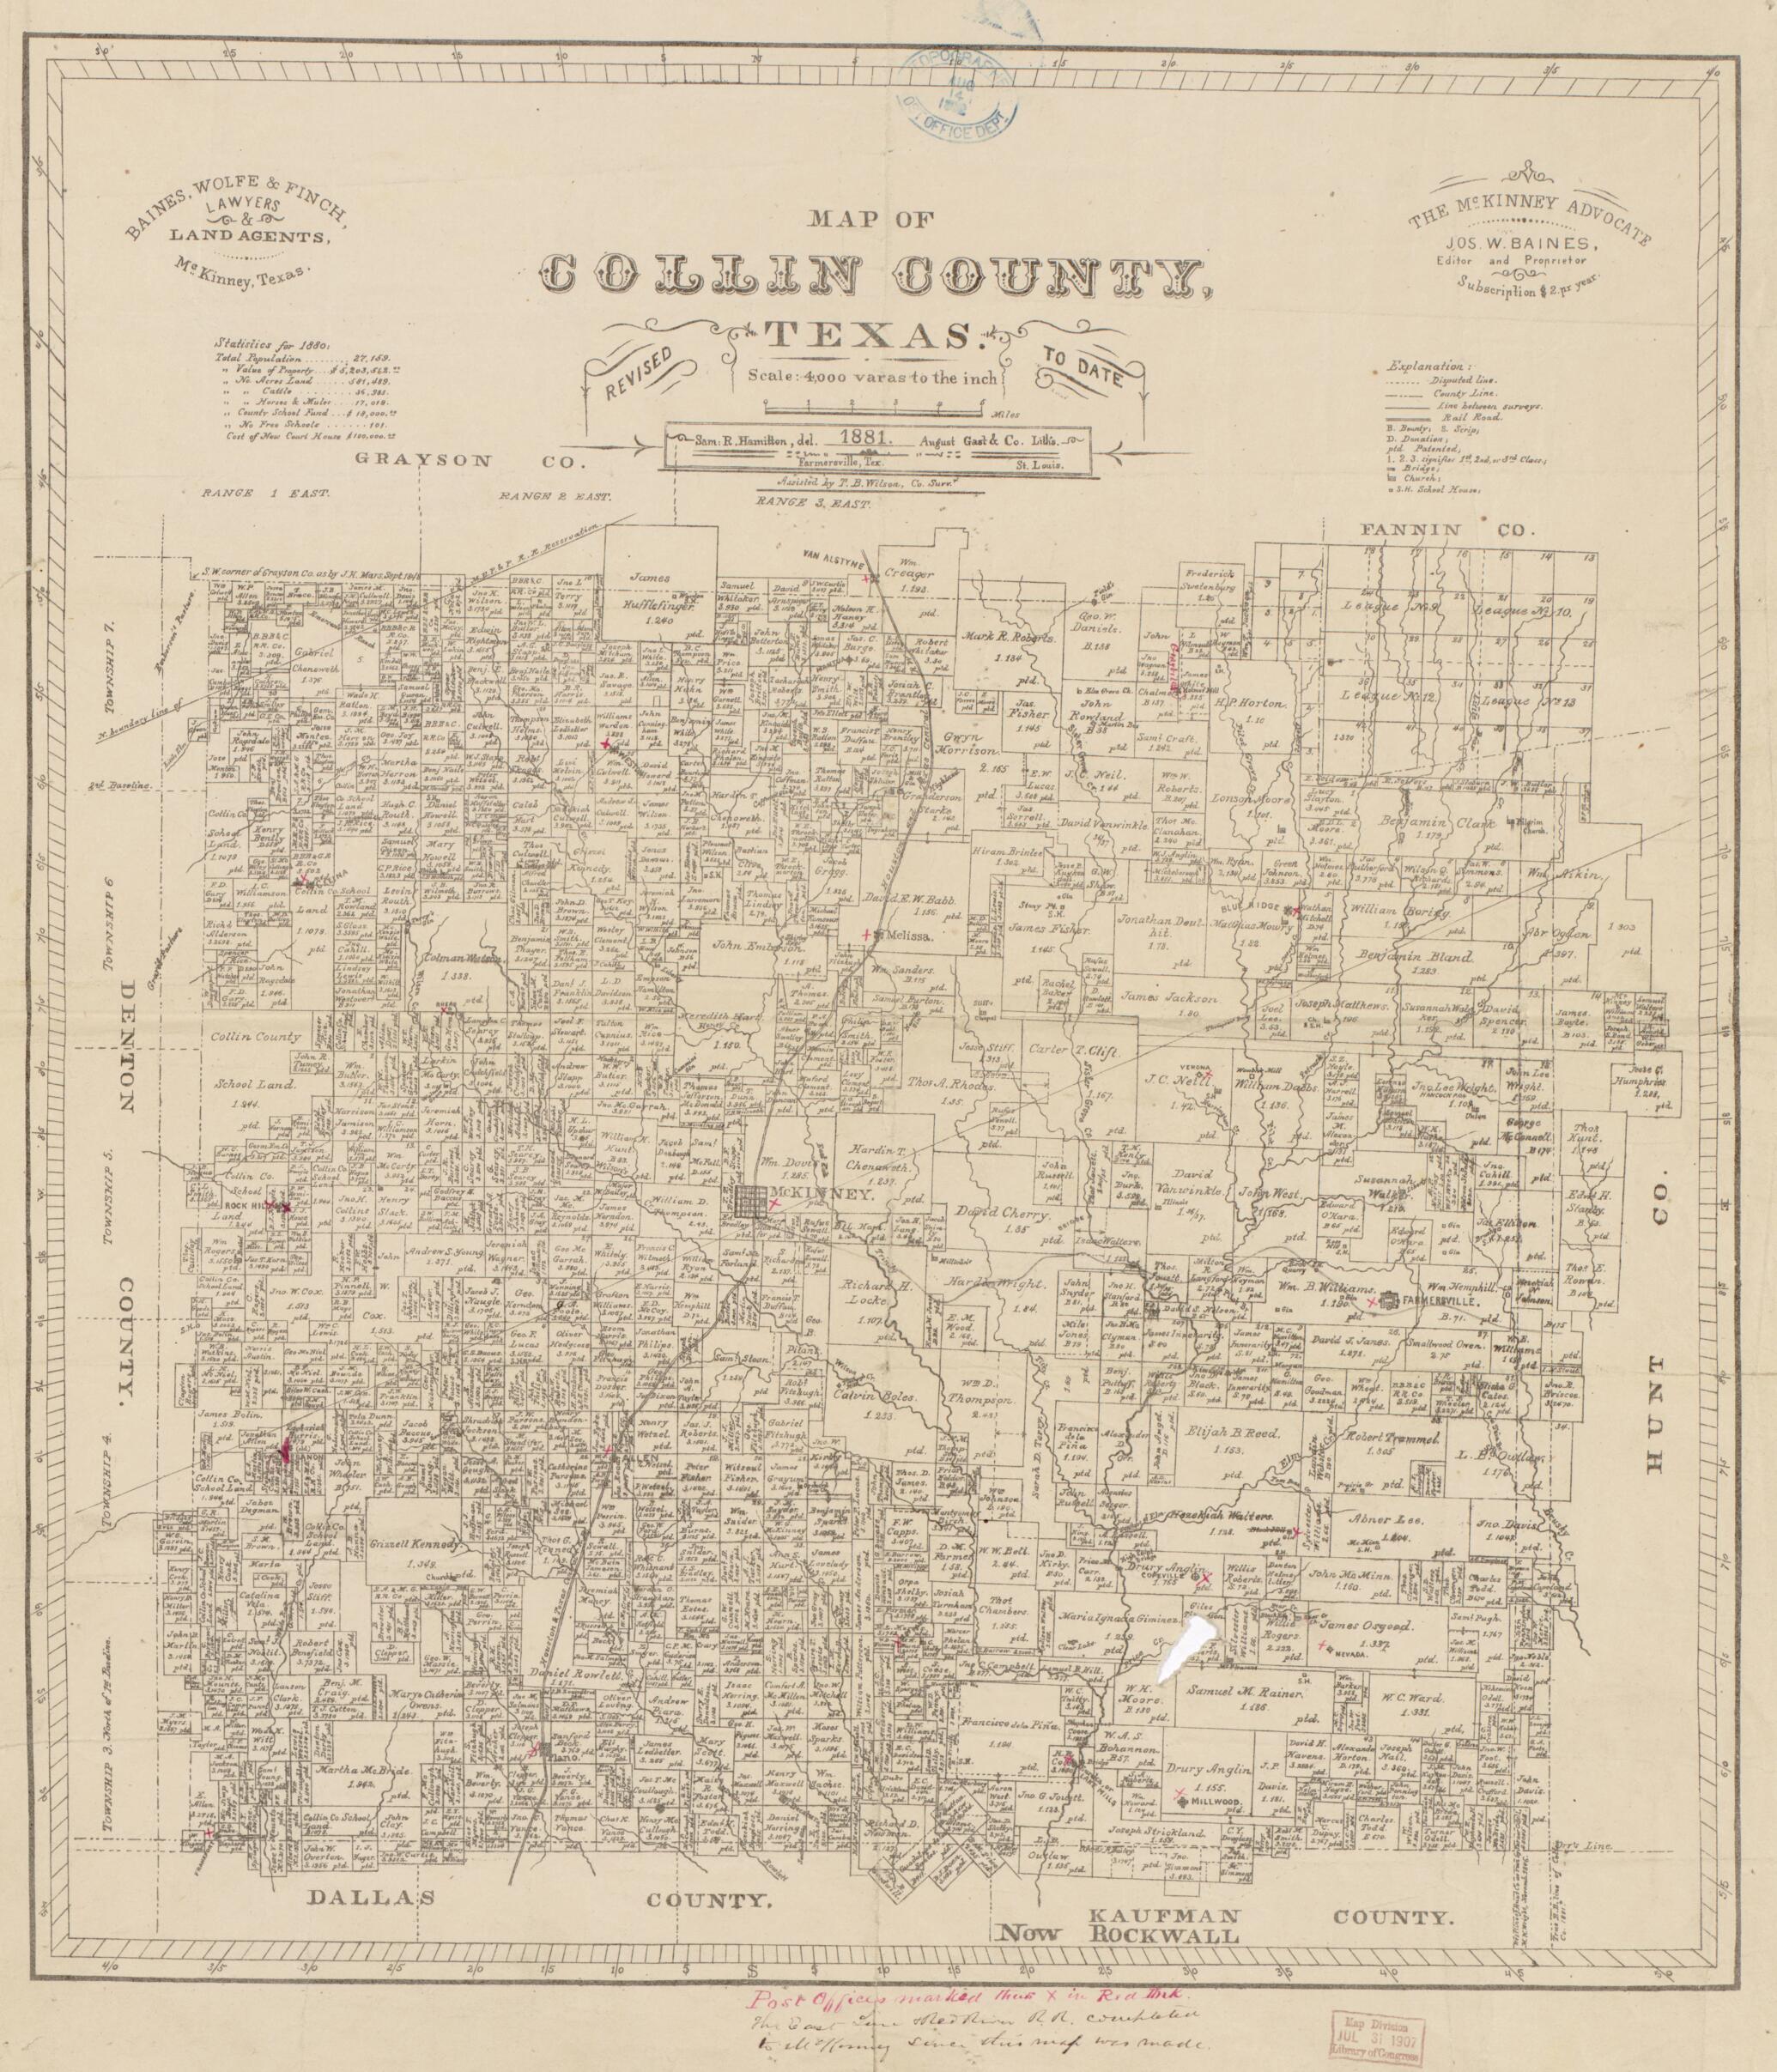 This old map of Map of Collin County, Texas from 1881 was created by  August Gast &amp; Co, Sam. R. Hamilton, T. B. Wilson in 1881